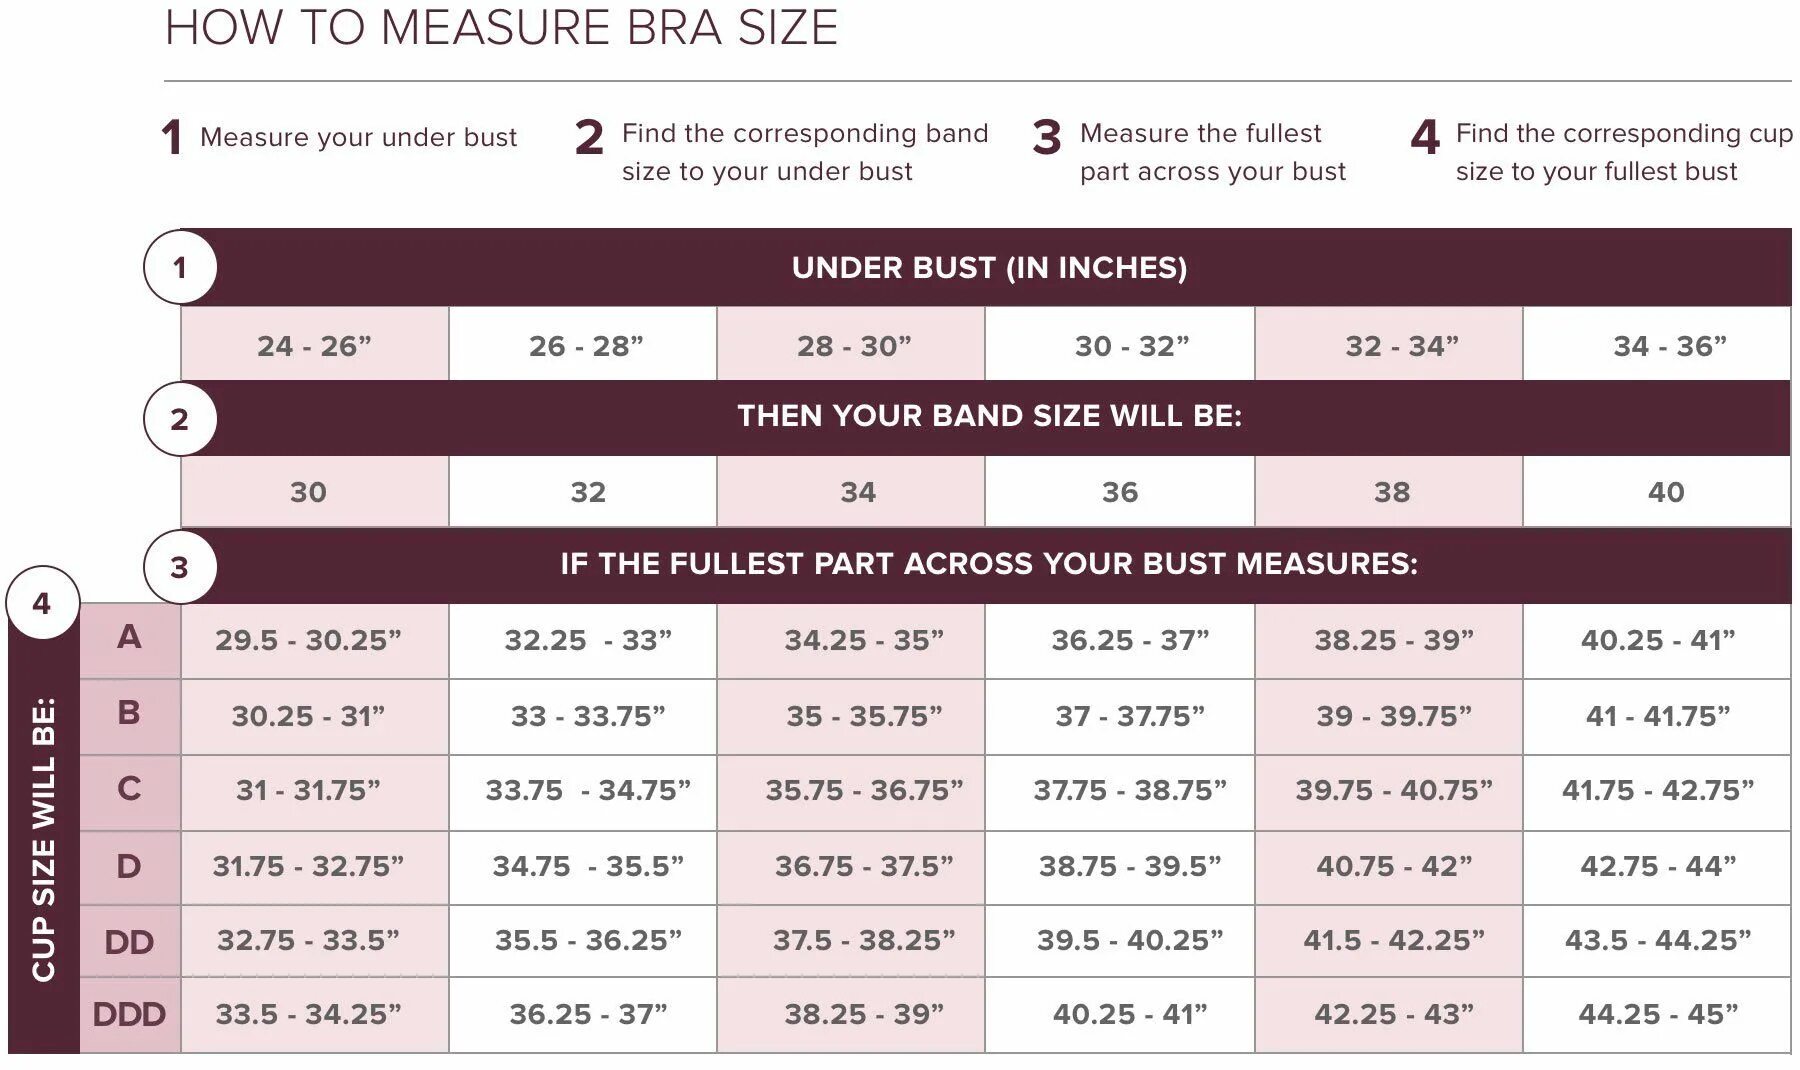 G Cup размер. Bra Cup Sizes таблица. Bra Band Size. Bra Size calculator. Размеры true